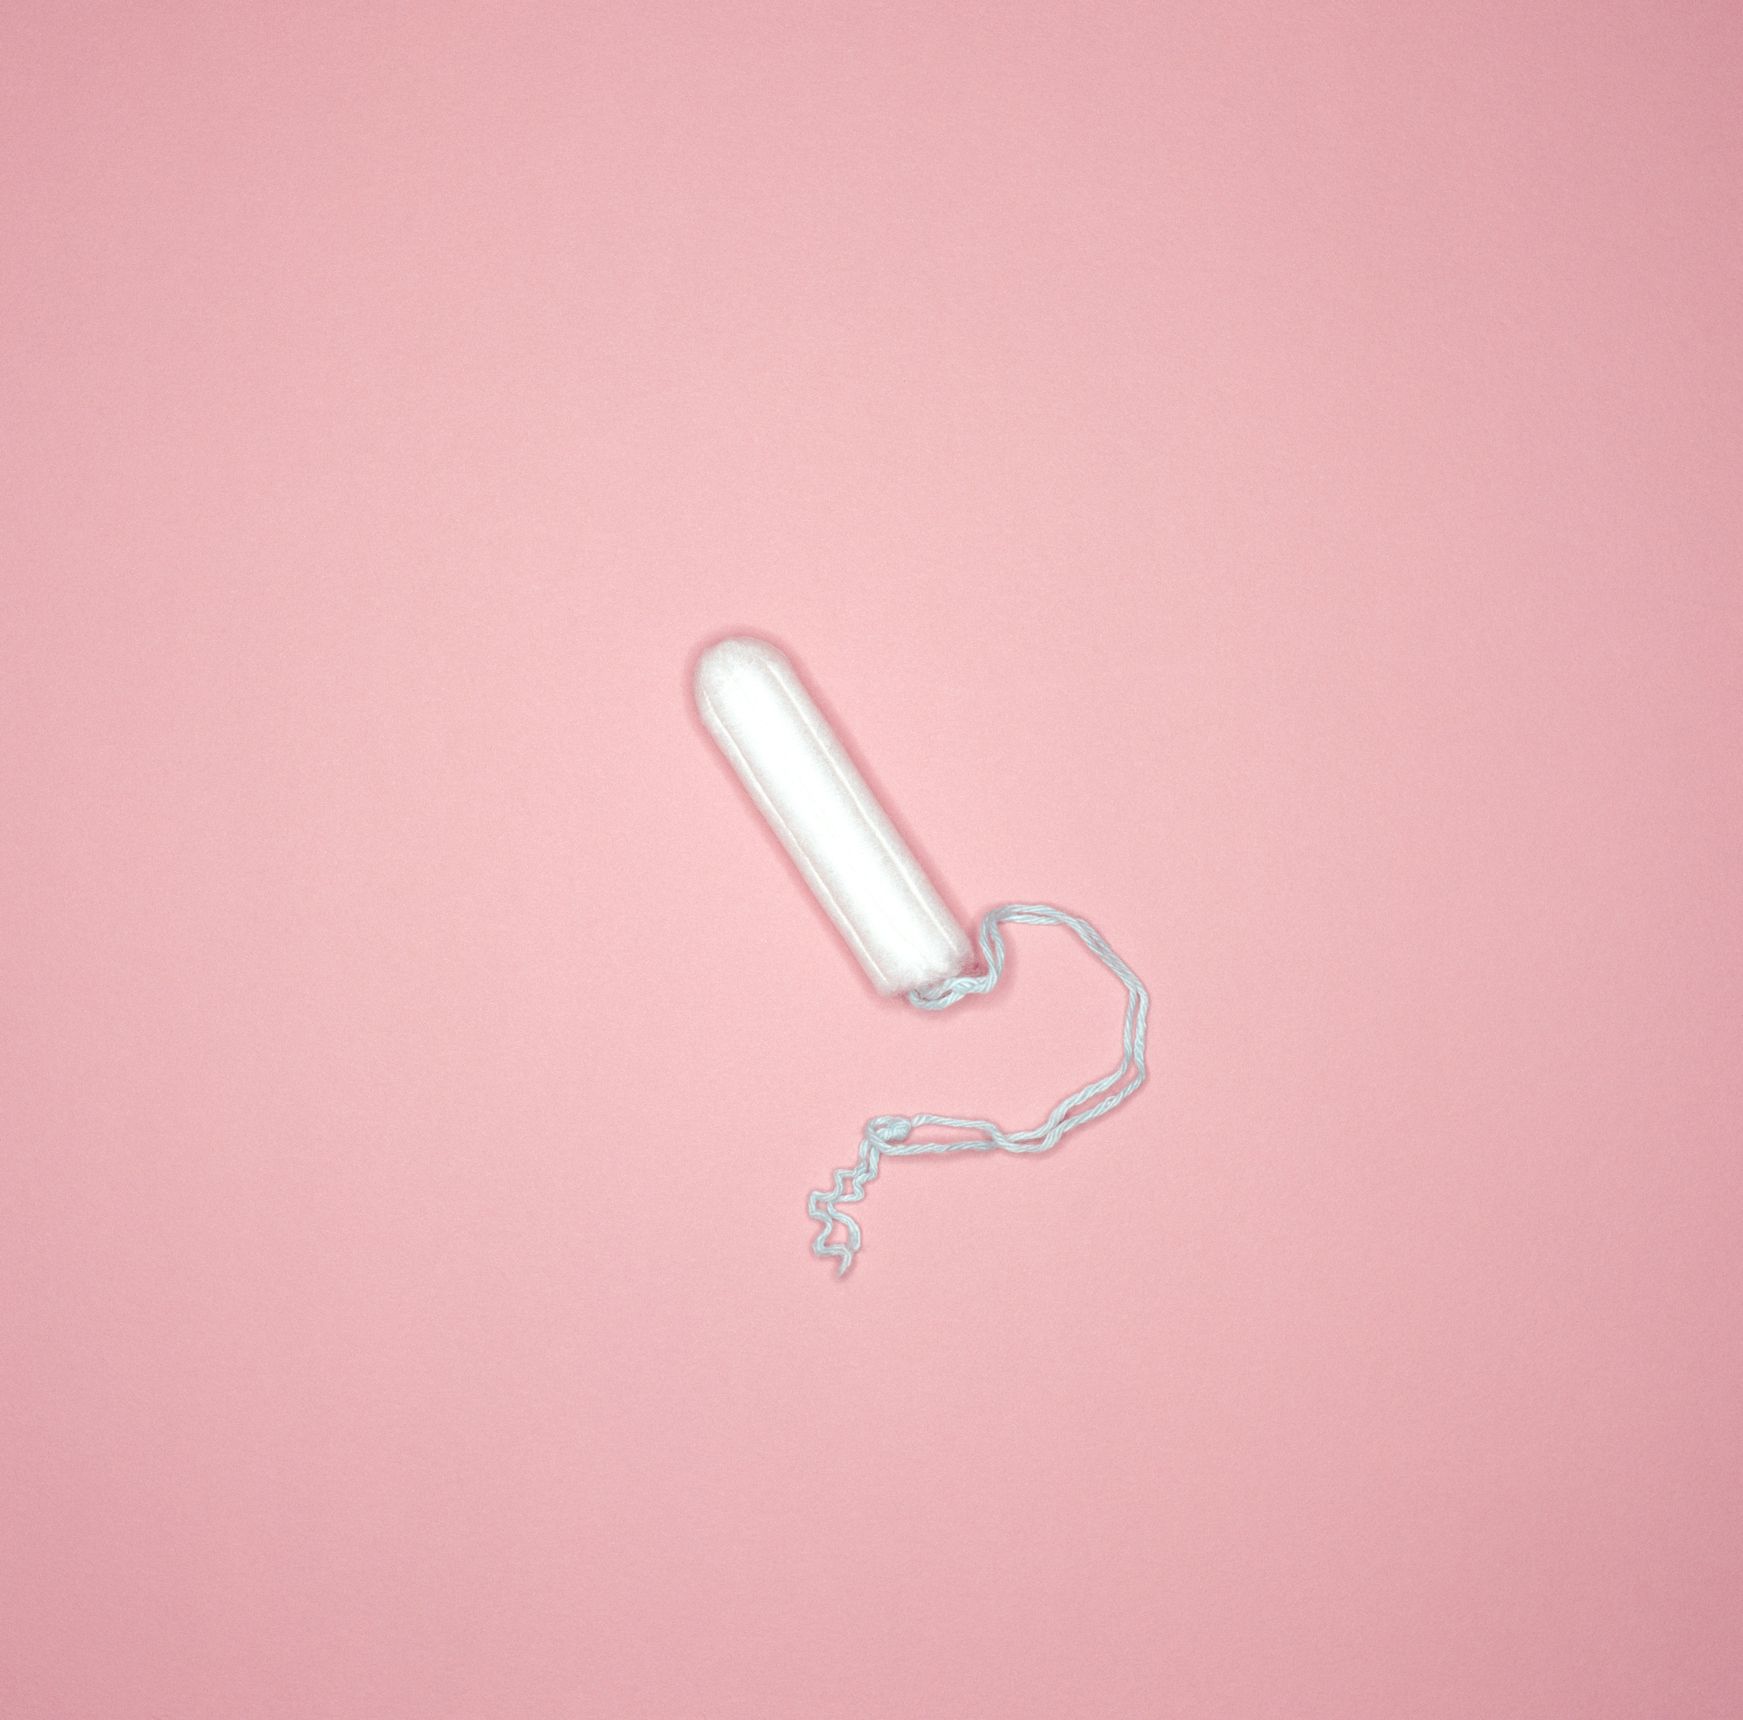 Symptoms of Toxic Shock Syndrome - The Woman's Clinic